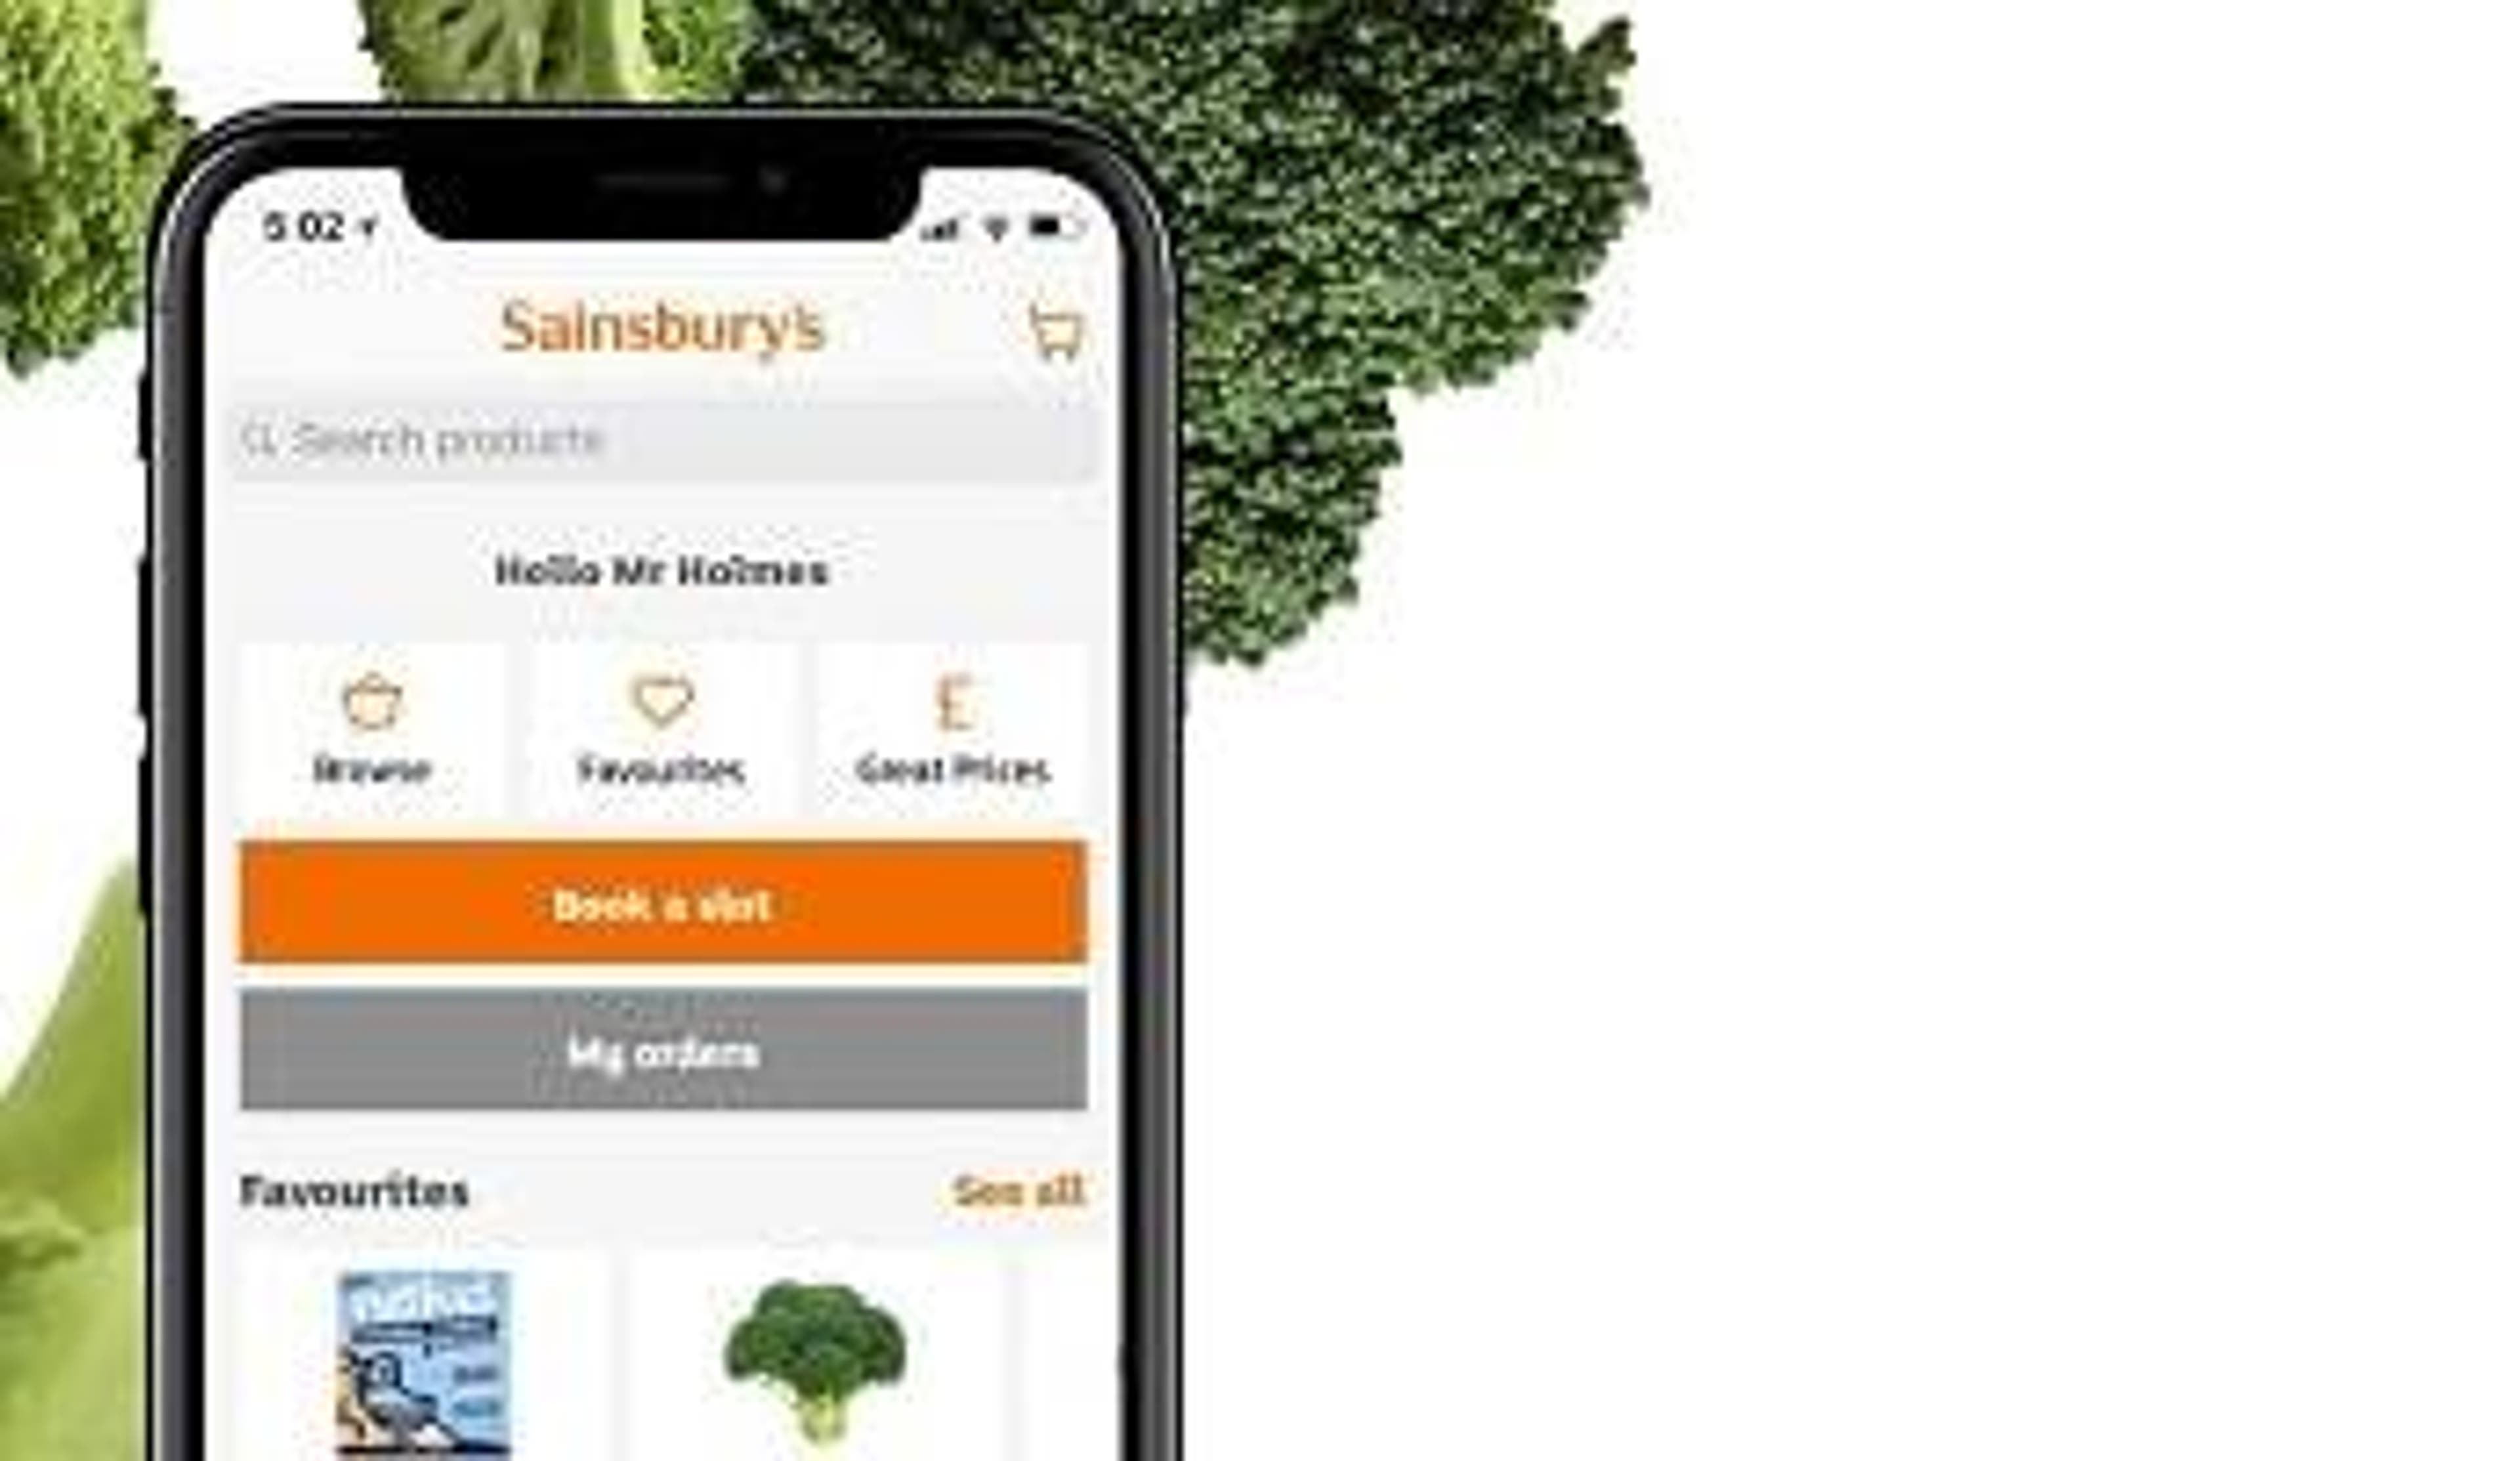  An iPhone with the Sainsbury's Groceries app open and some broccoli in the background 